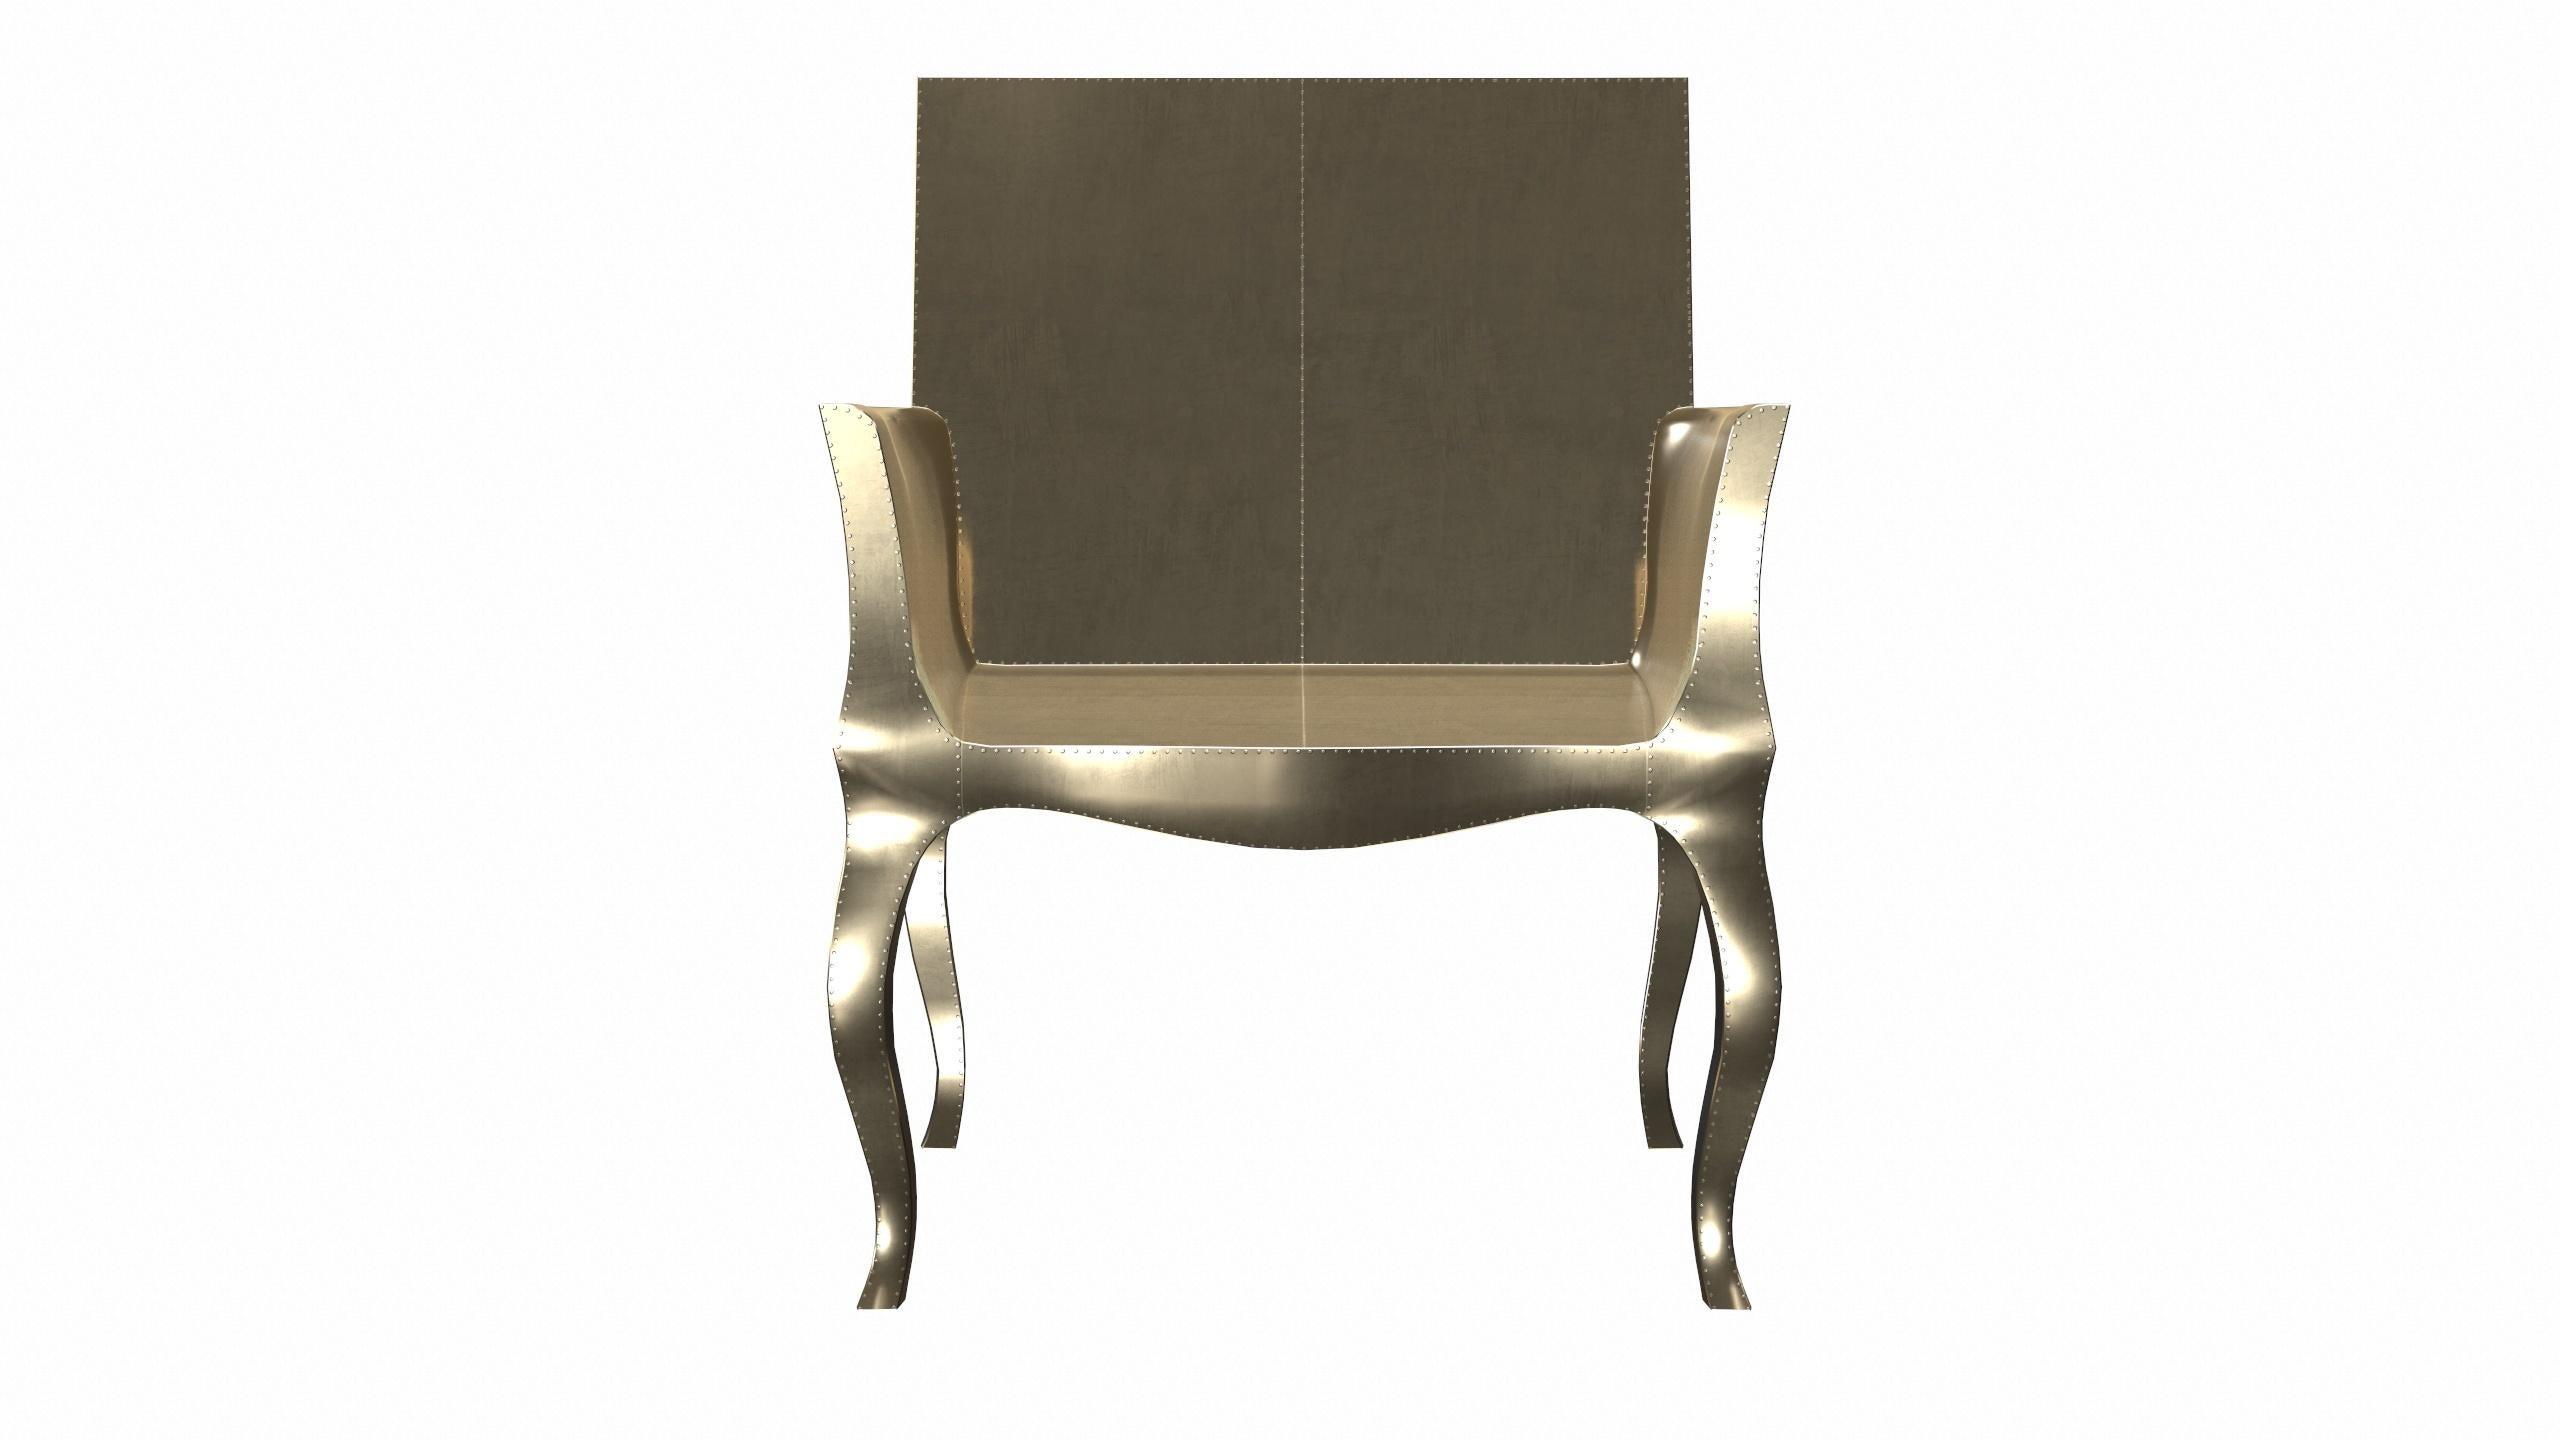 Indian Art Deco Accent Chair in Smooth Brass by Paul Mathieu for S. Odegard For Sale